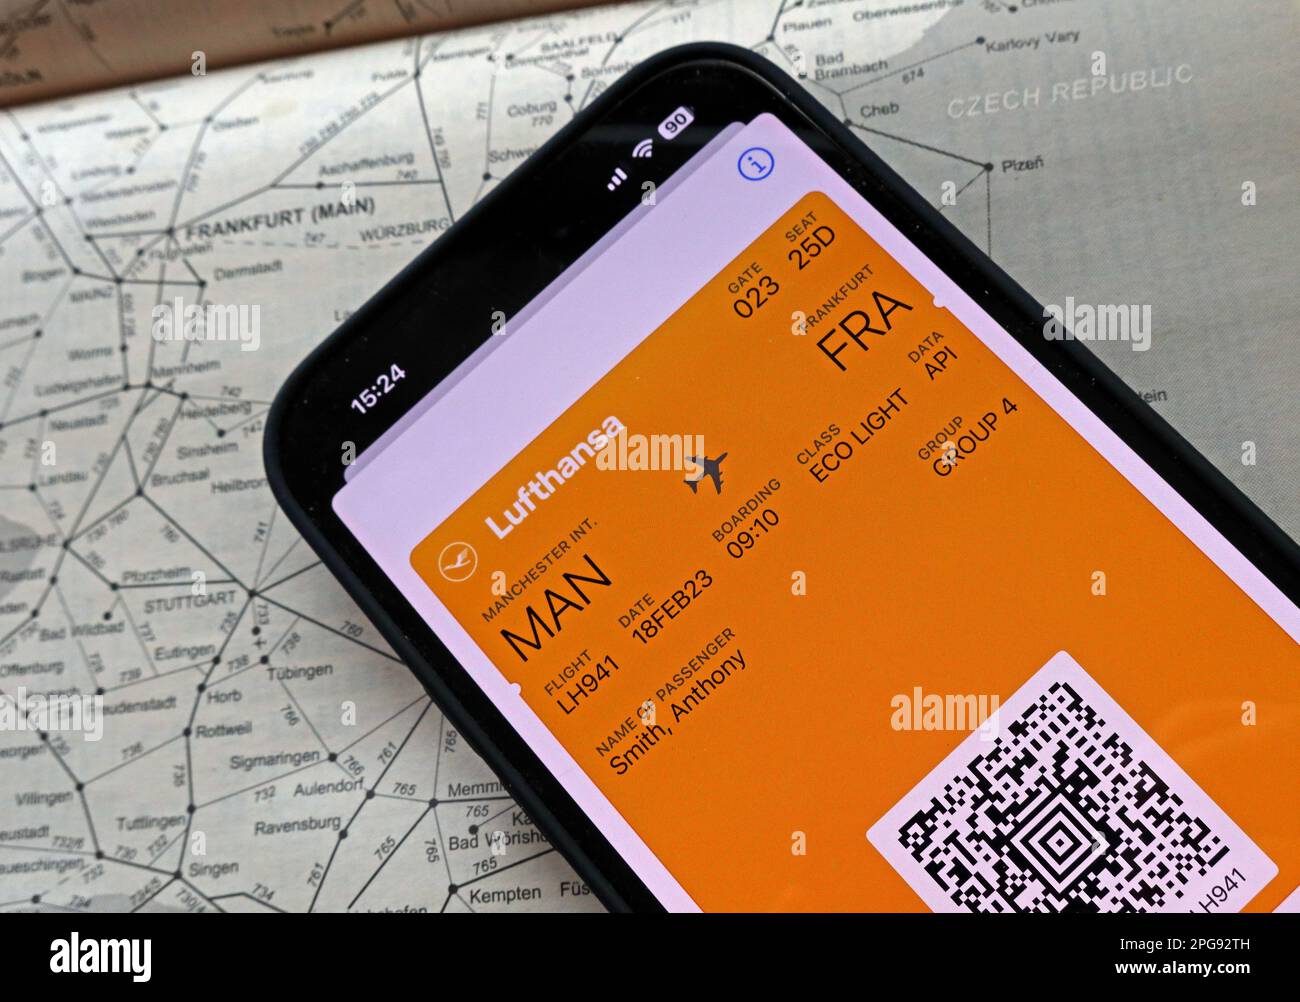 Airplane flight digital boarding pass MAN-FRA on mobile phone, with Lufthansa, and rail transport map of Frankfurt, Germany Stock Photo